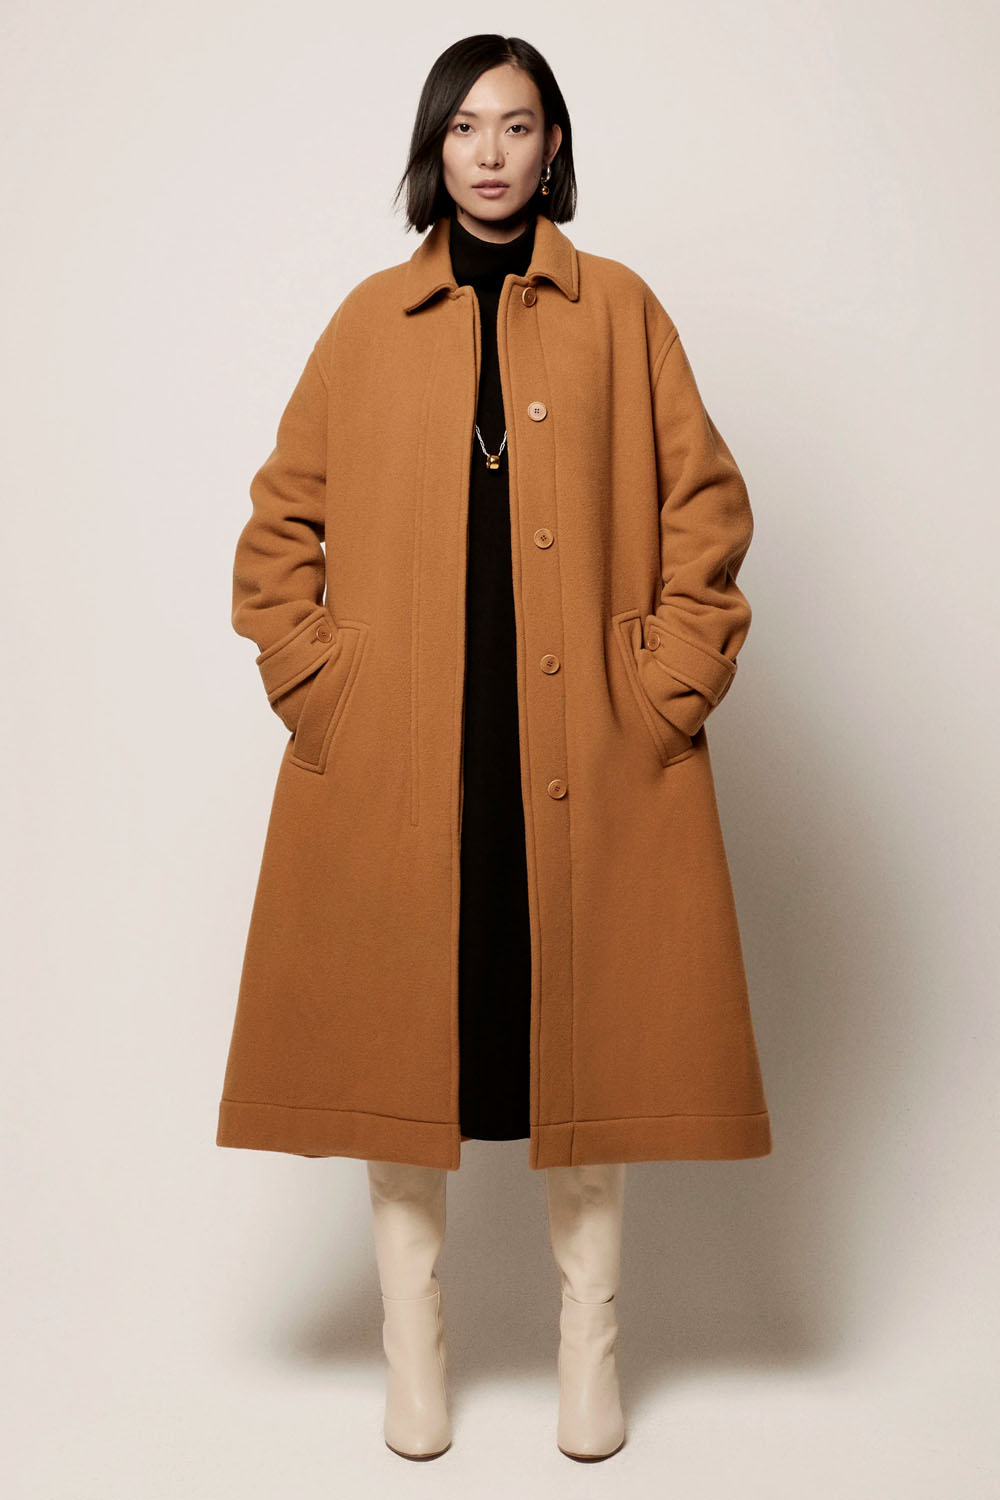 Another tomorrow wool coat oversized caramel colored